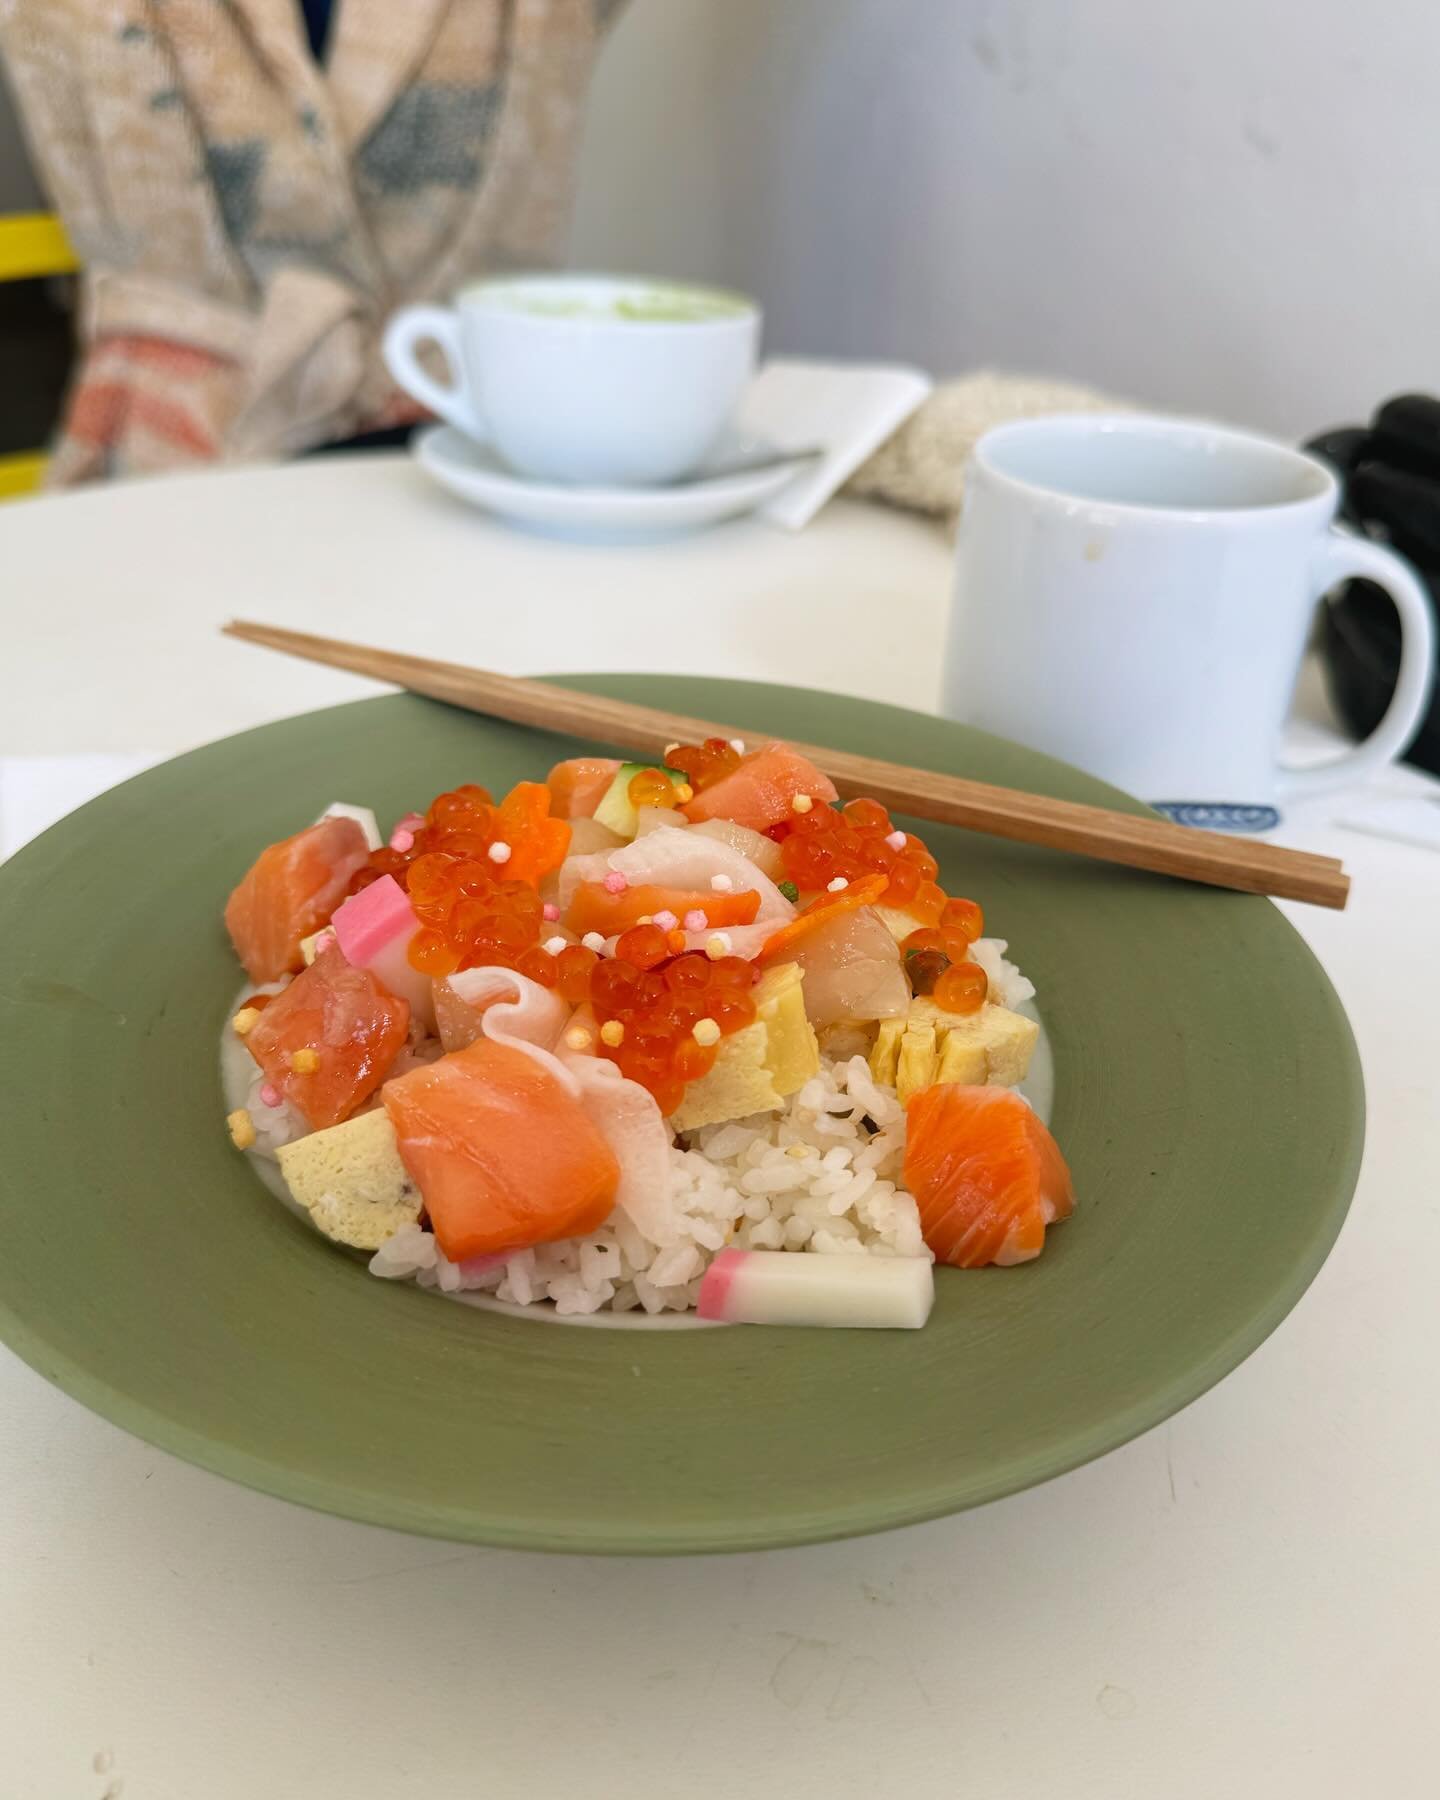 The chirashi sushi bowl at @soenportland + their amazing miso soup, followed by their dango for dessert = a perfect meal.

Seriously, their chirashi bowl is phenomenal! Add a matcha latte from @couriercoffeeroasters (Soen shares space with Courier) t